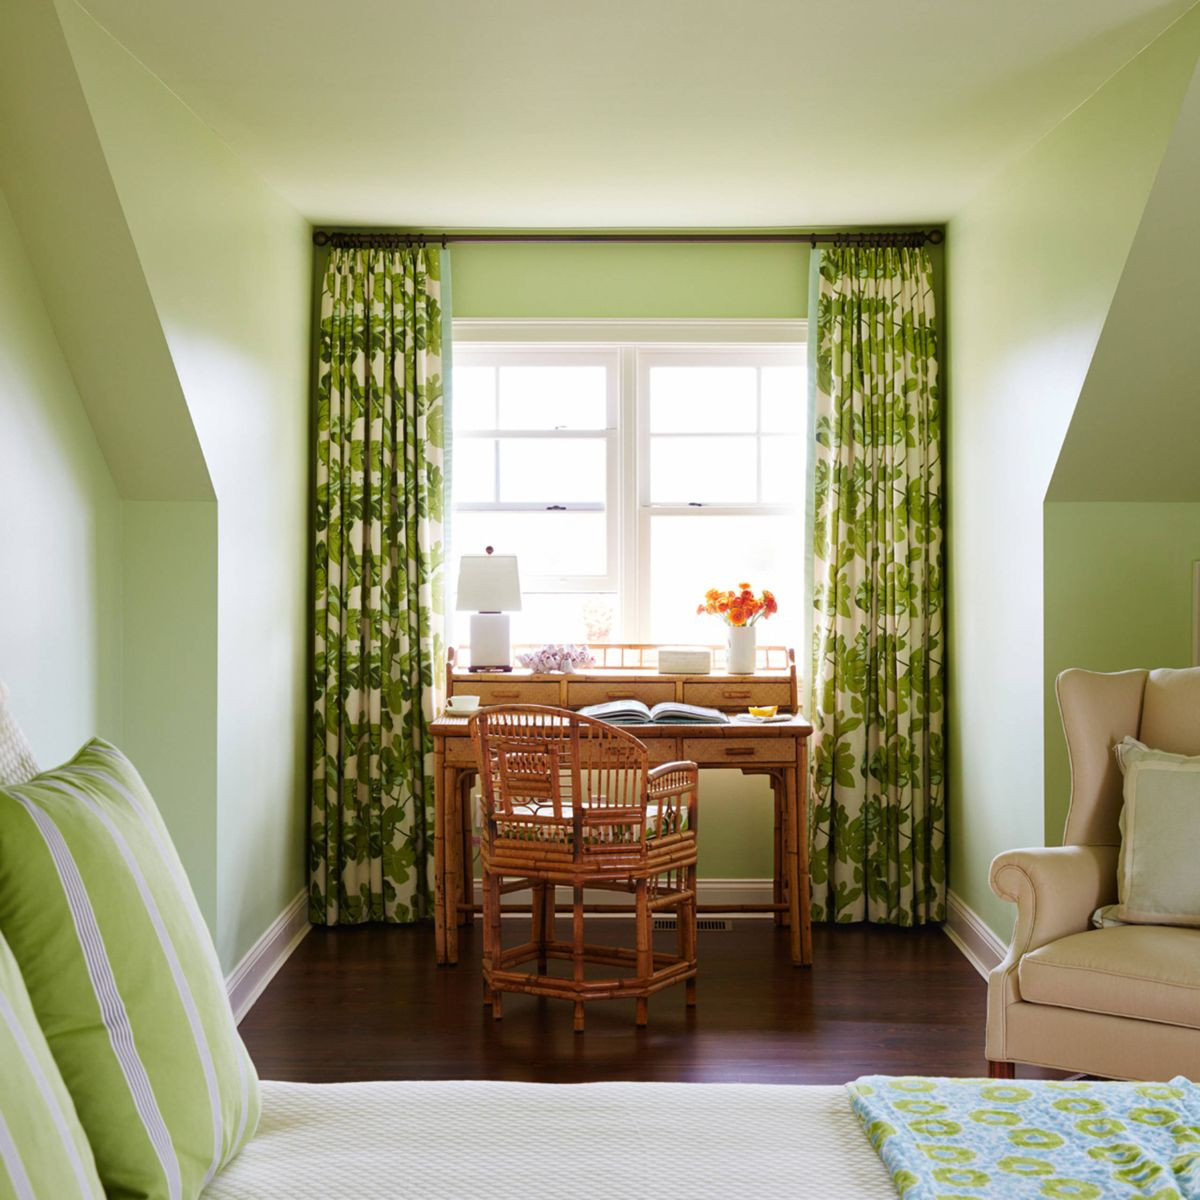 Green Paint For Bedroom
 The Four Best Paint Colors For Bedrooms